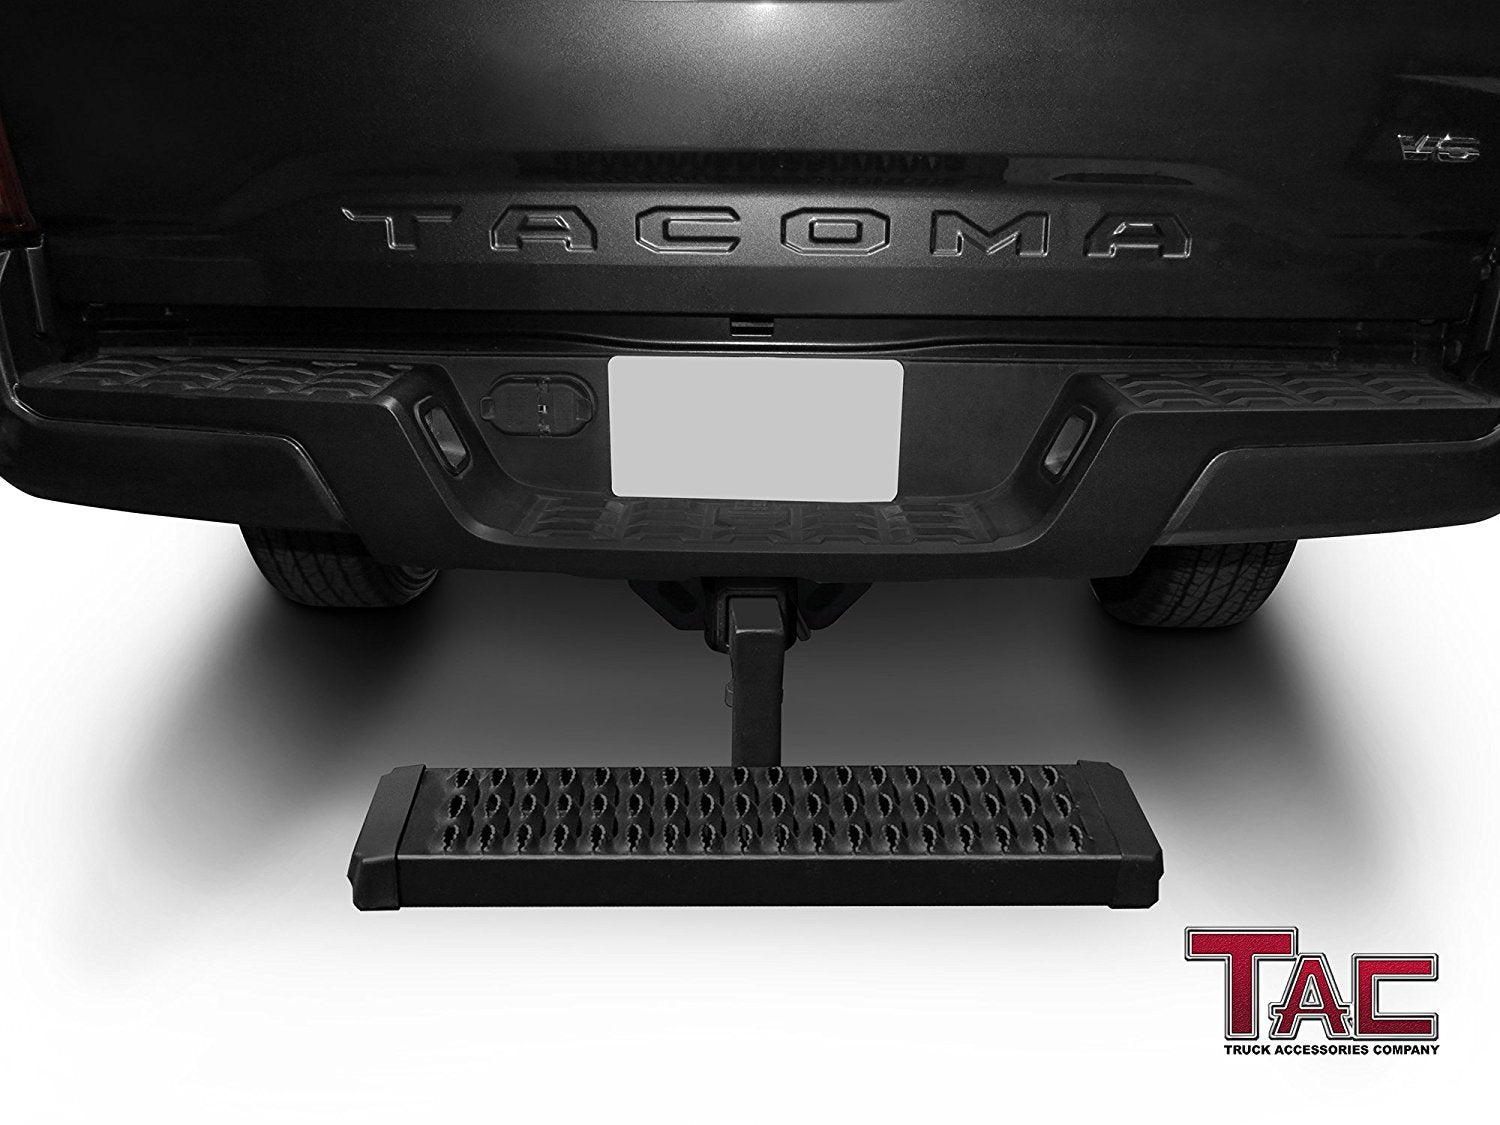 TAC Hitch Step Compatible with 2" Rear Hitch Receiver 7.3" Width With 6" Drop SUV Pickup Truck Van Bumper Protector Universal Aluminum Black (Hitch Pin and Clip included) - 0